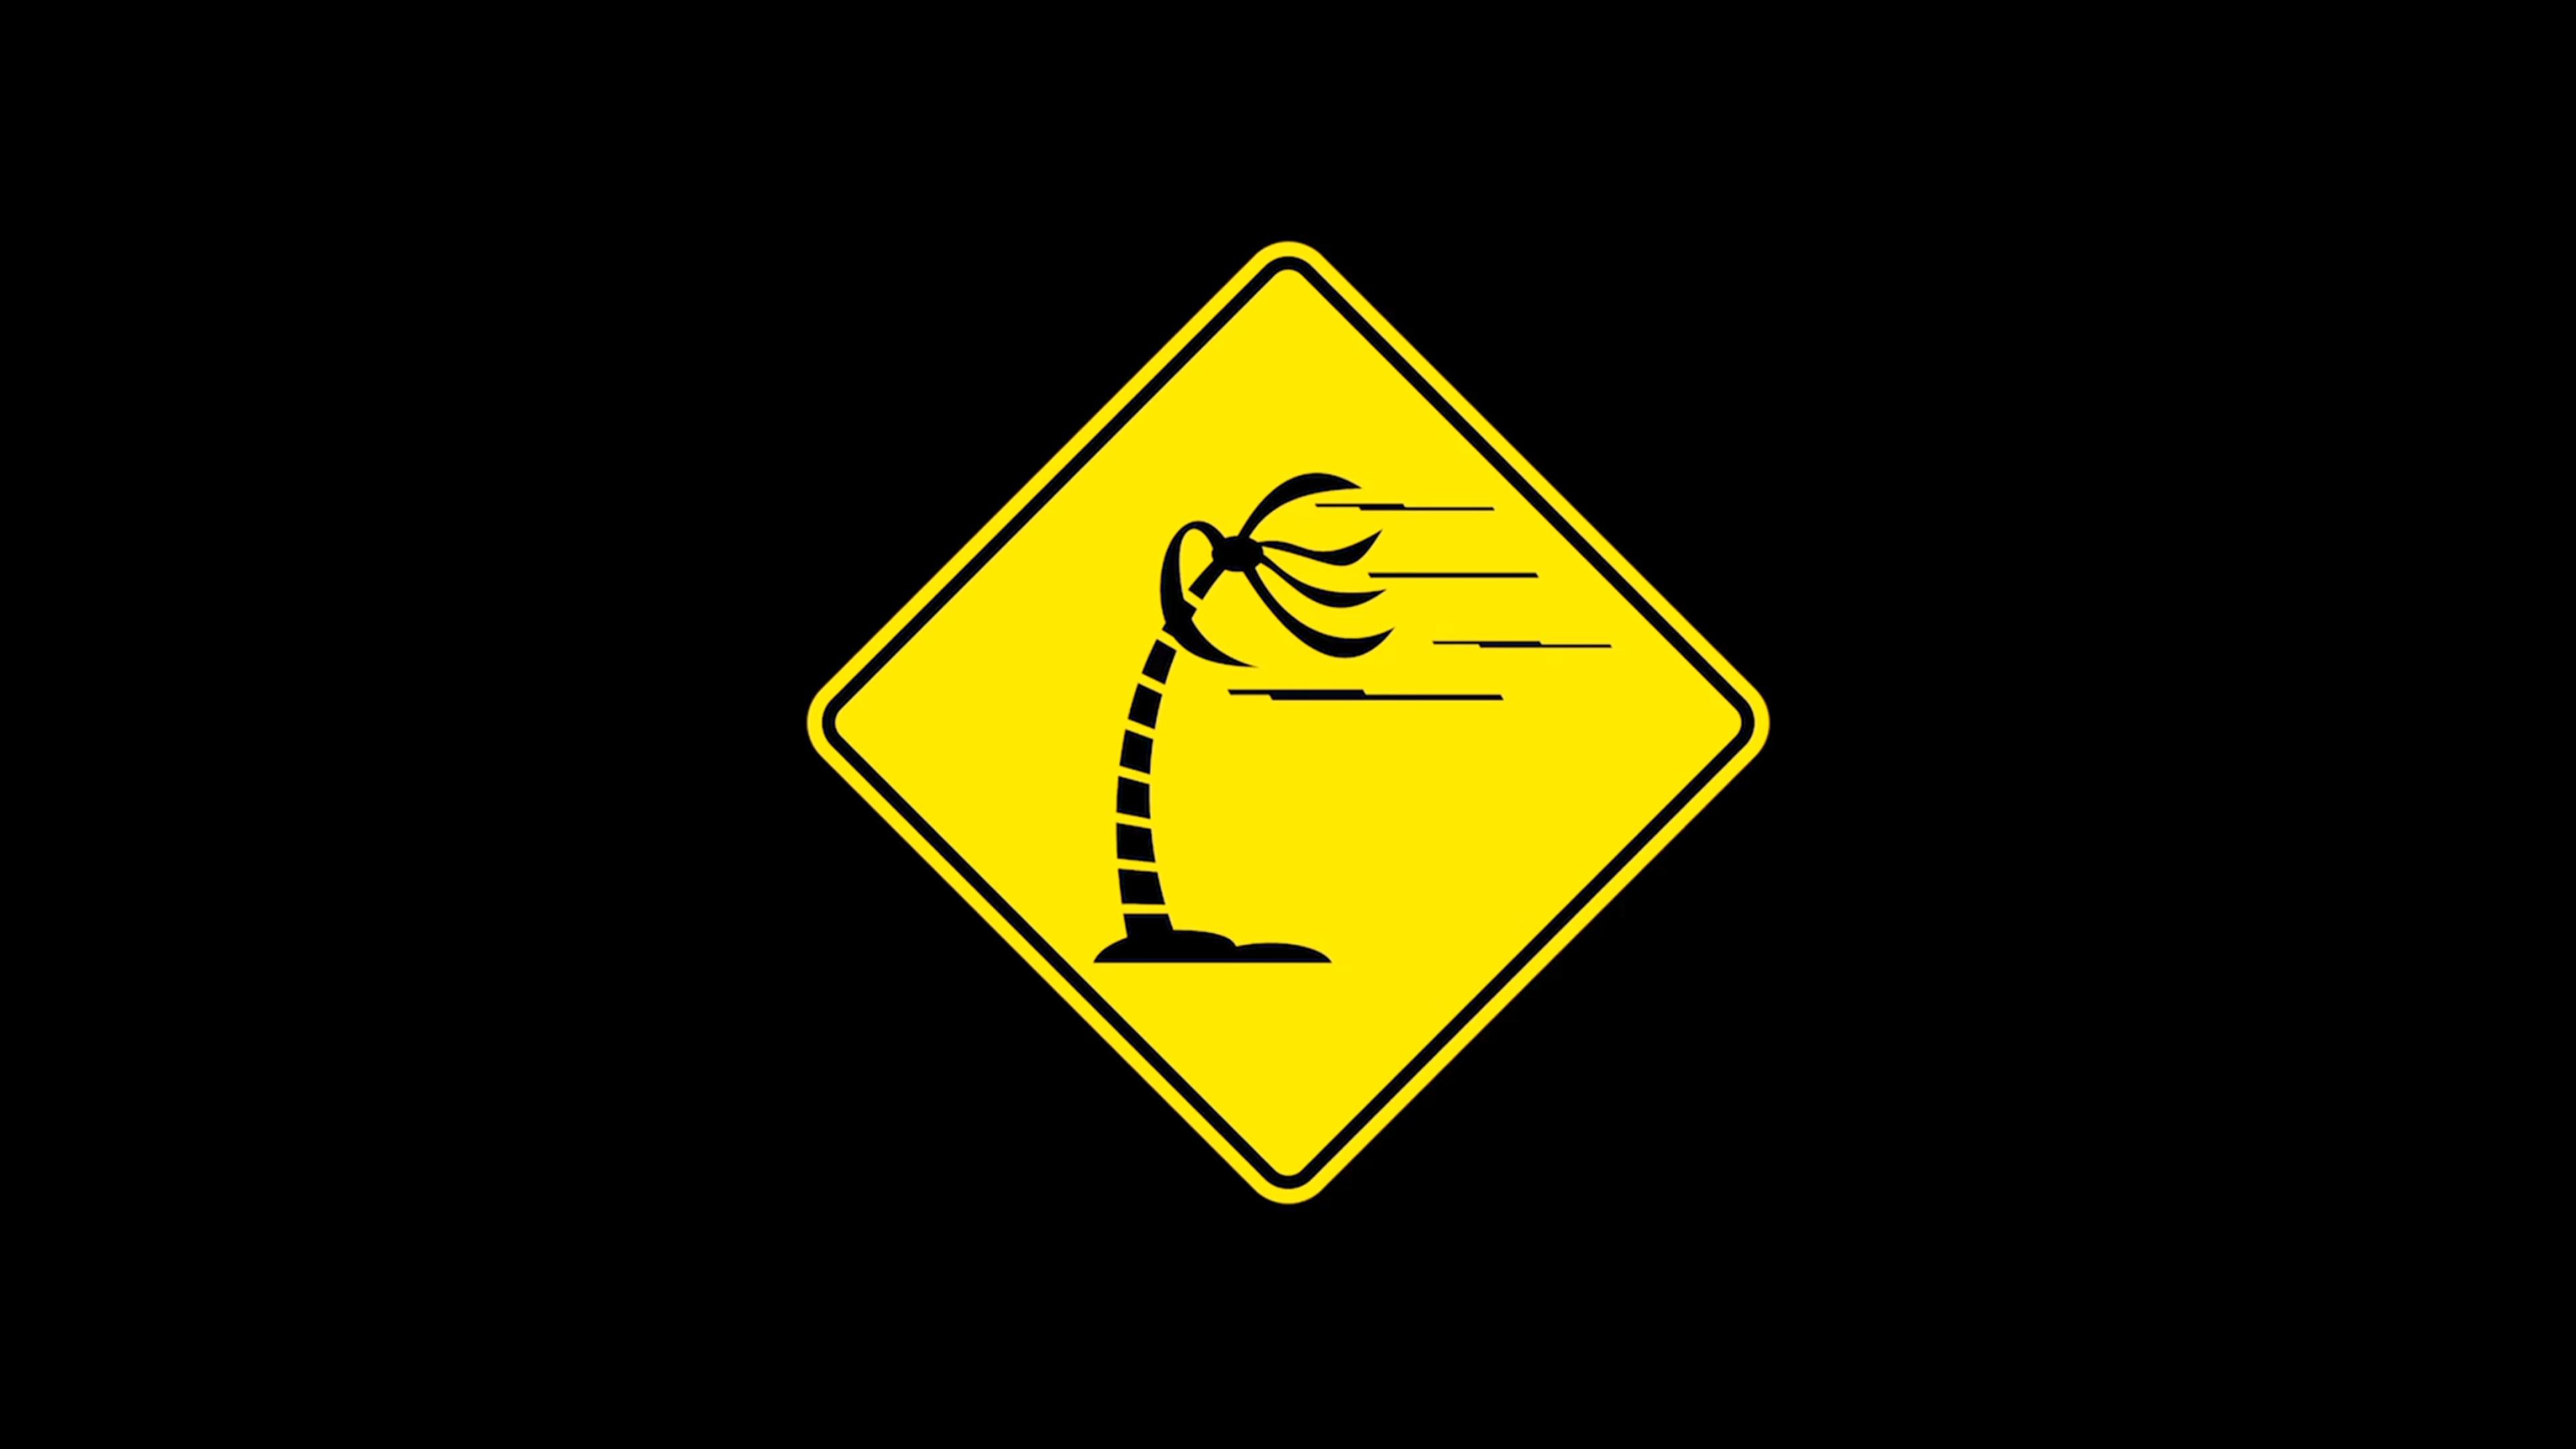 Yellow warning sign with a black palm tree bent over in strong wind, signifying severe weather or wind conditions.